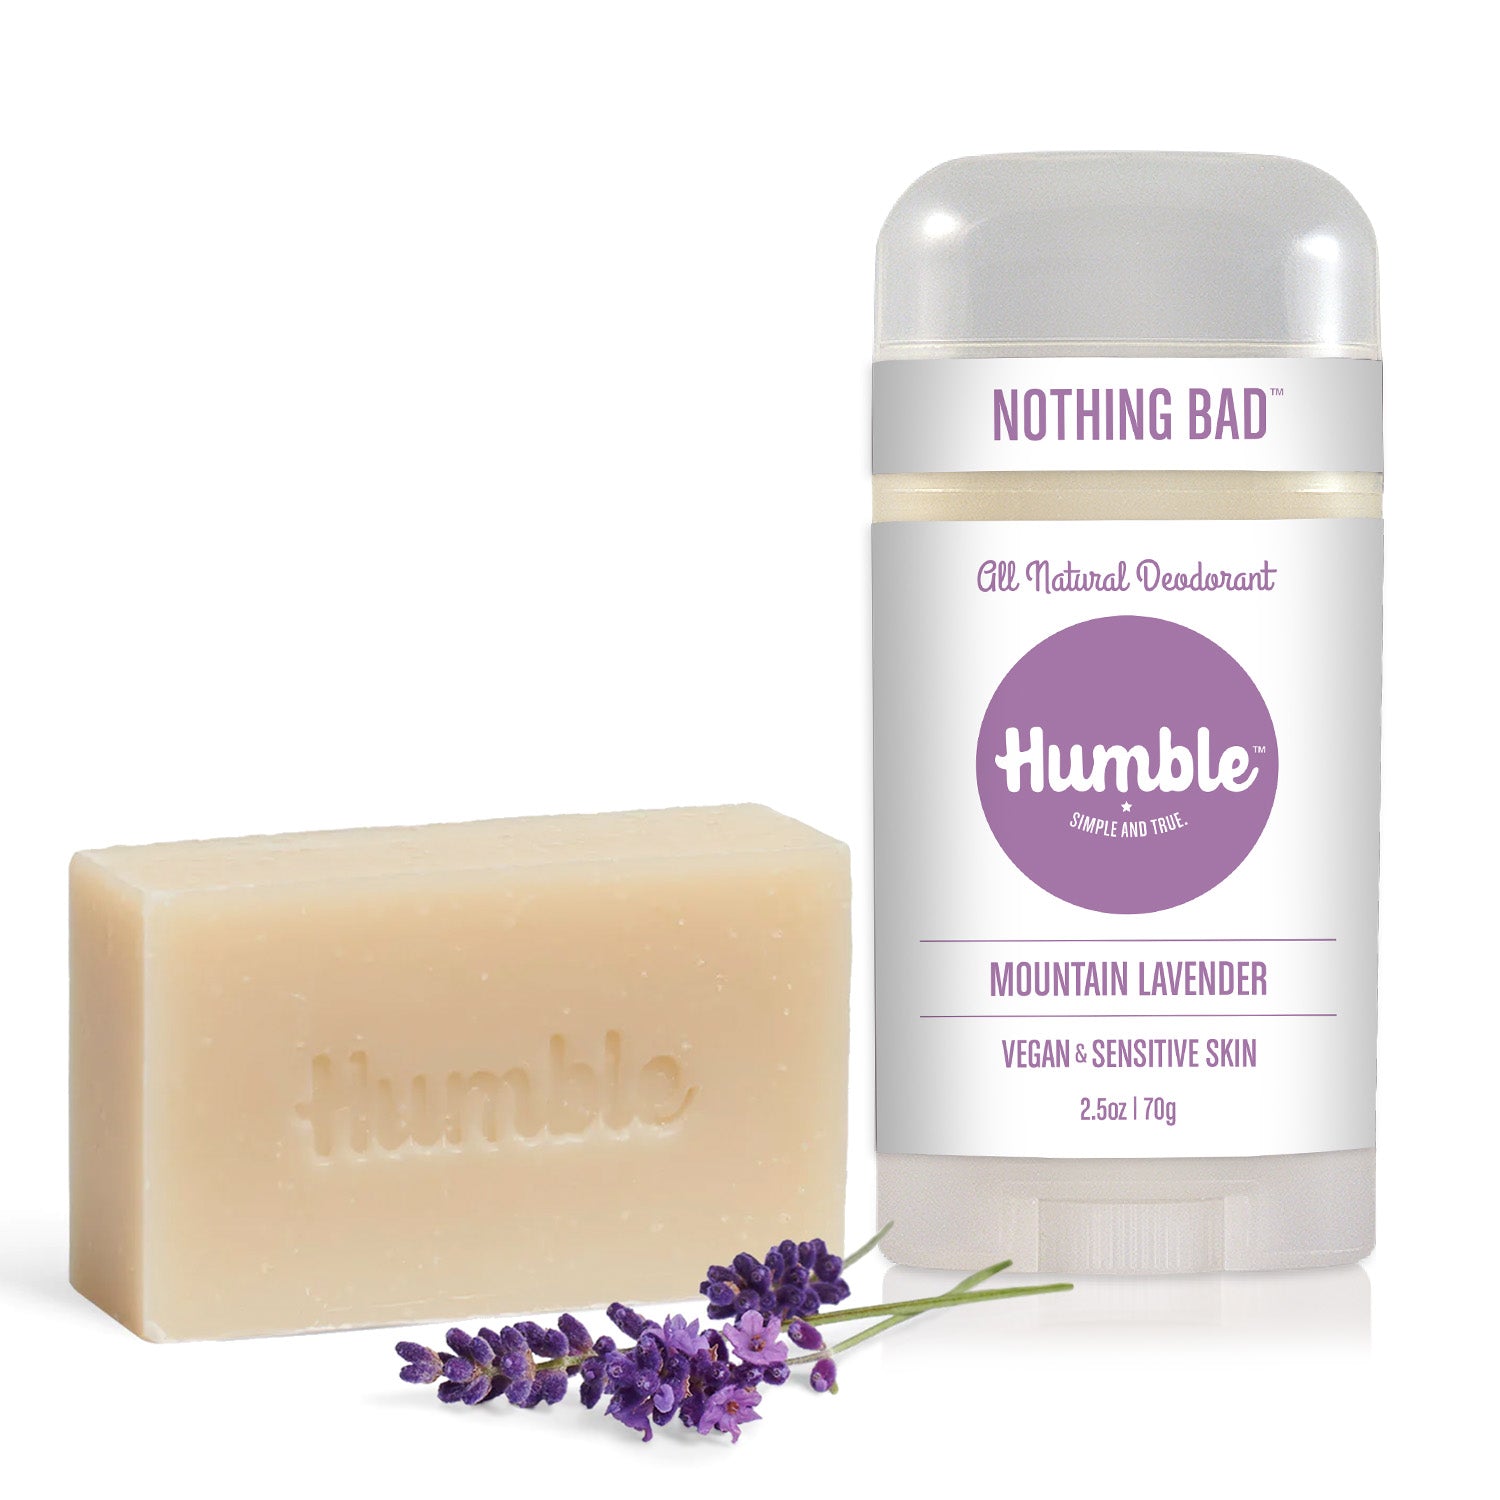 Humble Nothing Bad All Natural Deodorant – Mountain Lavender